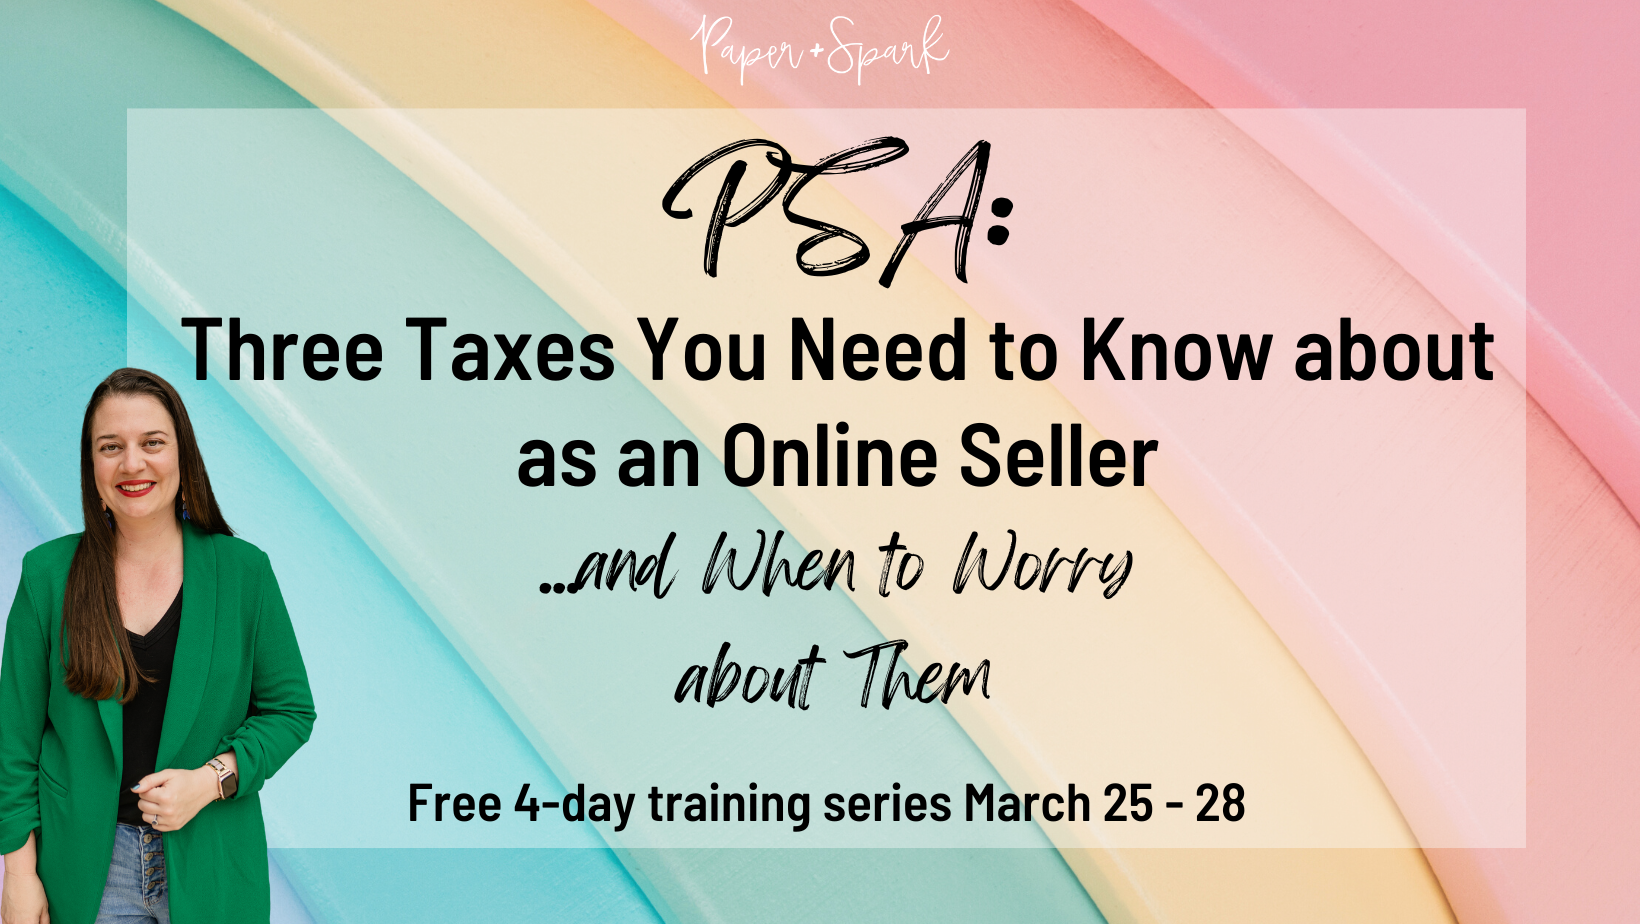 PSA - 3 Taxes to Know about as an Online Seller and When to Worry about Them (Evening Edition!) event cover photo